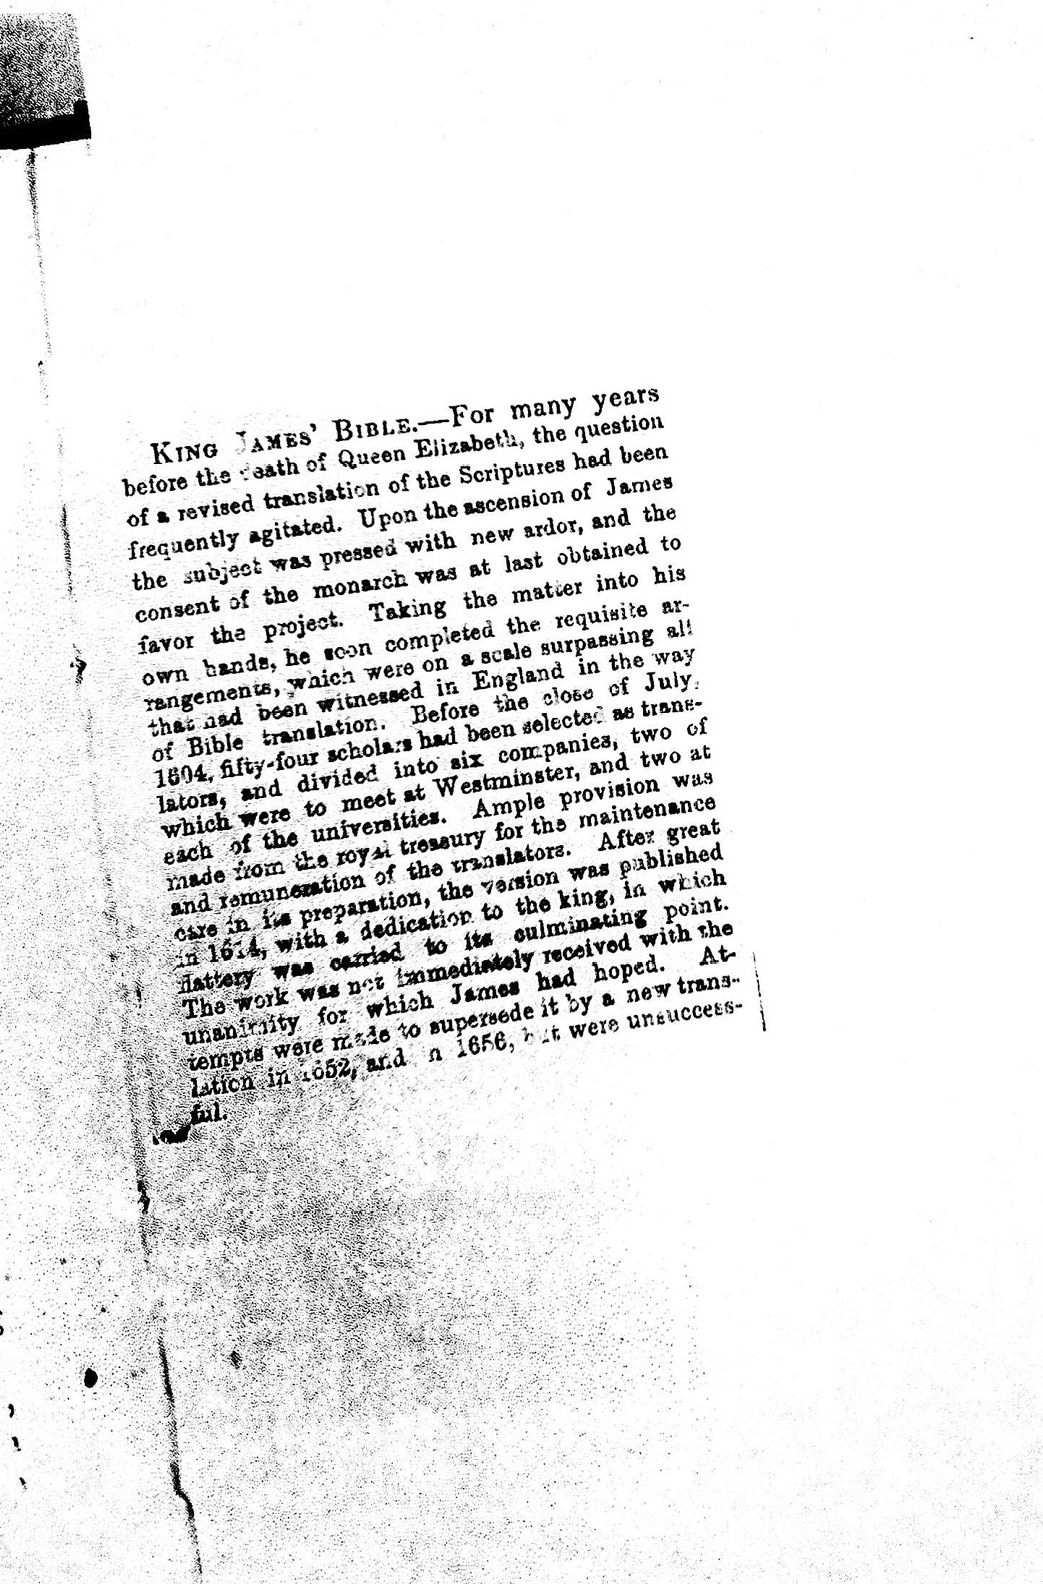 A photocopy of a short column of text about the history of the King James Bible, concerning James's decision to order the printing of the Bible and some of the practicalities of its production.